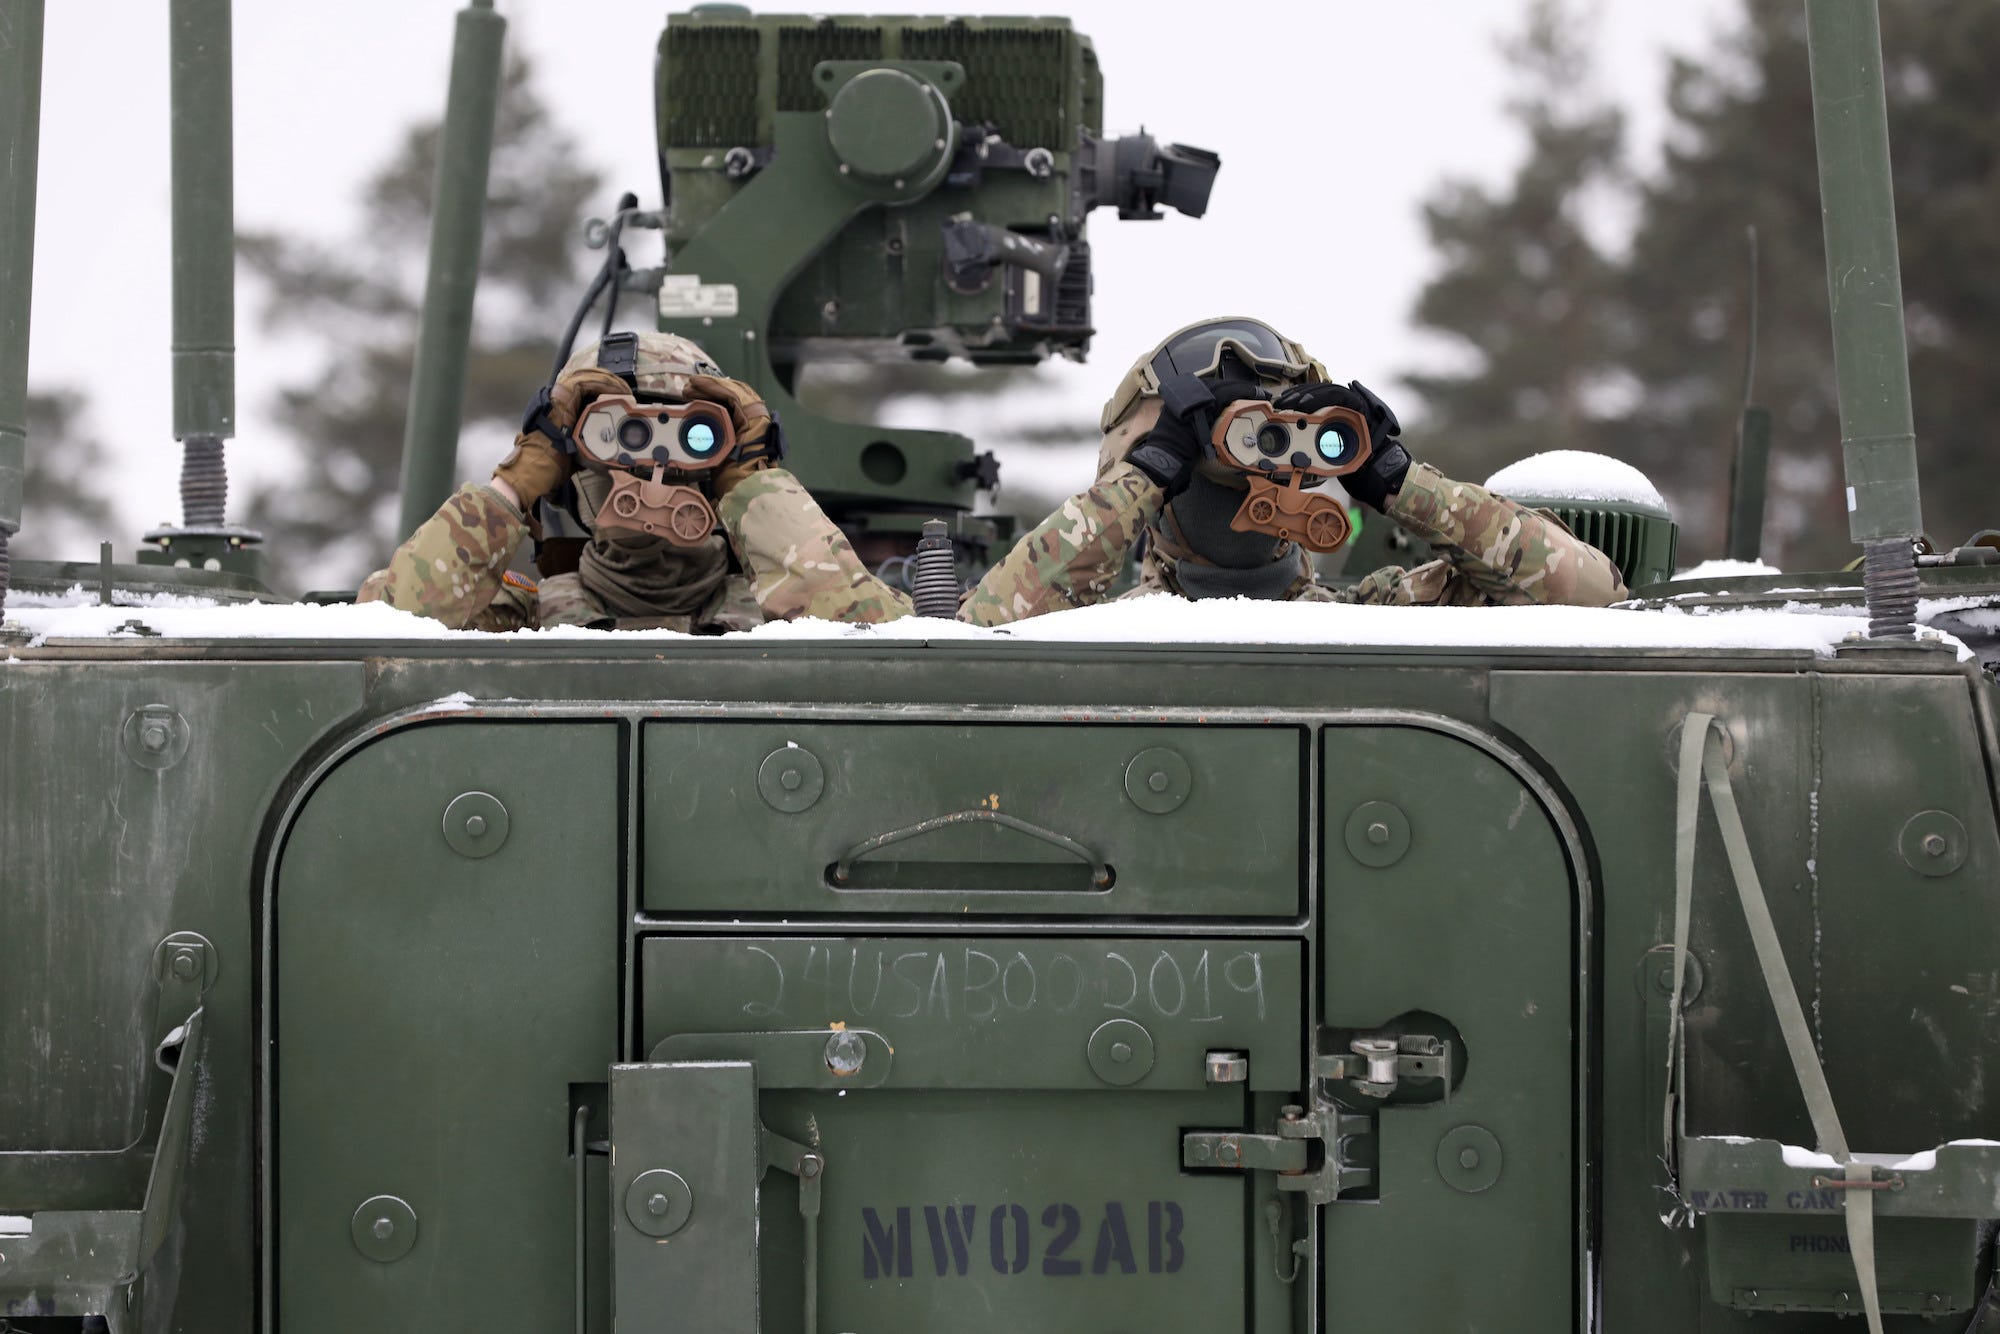 US soldiers with binoculars during NATO exercise